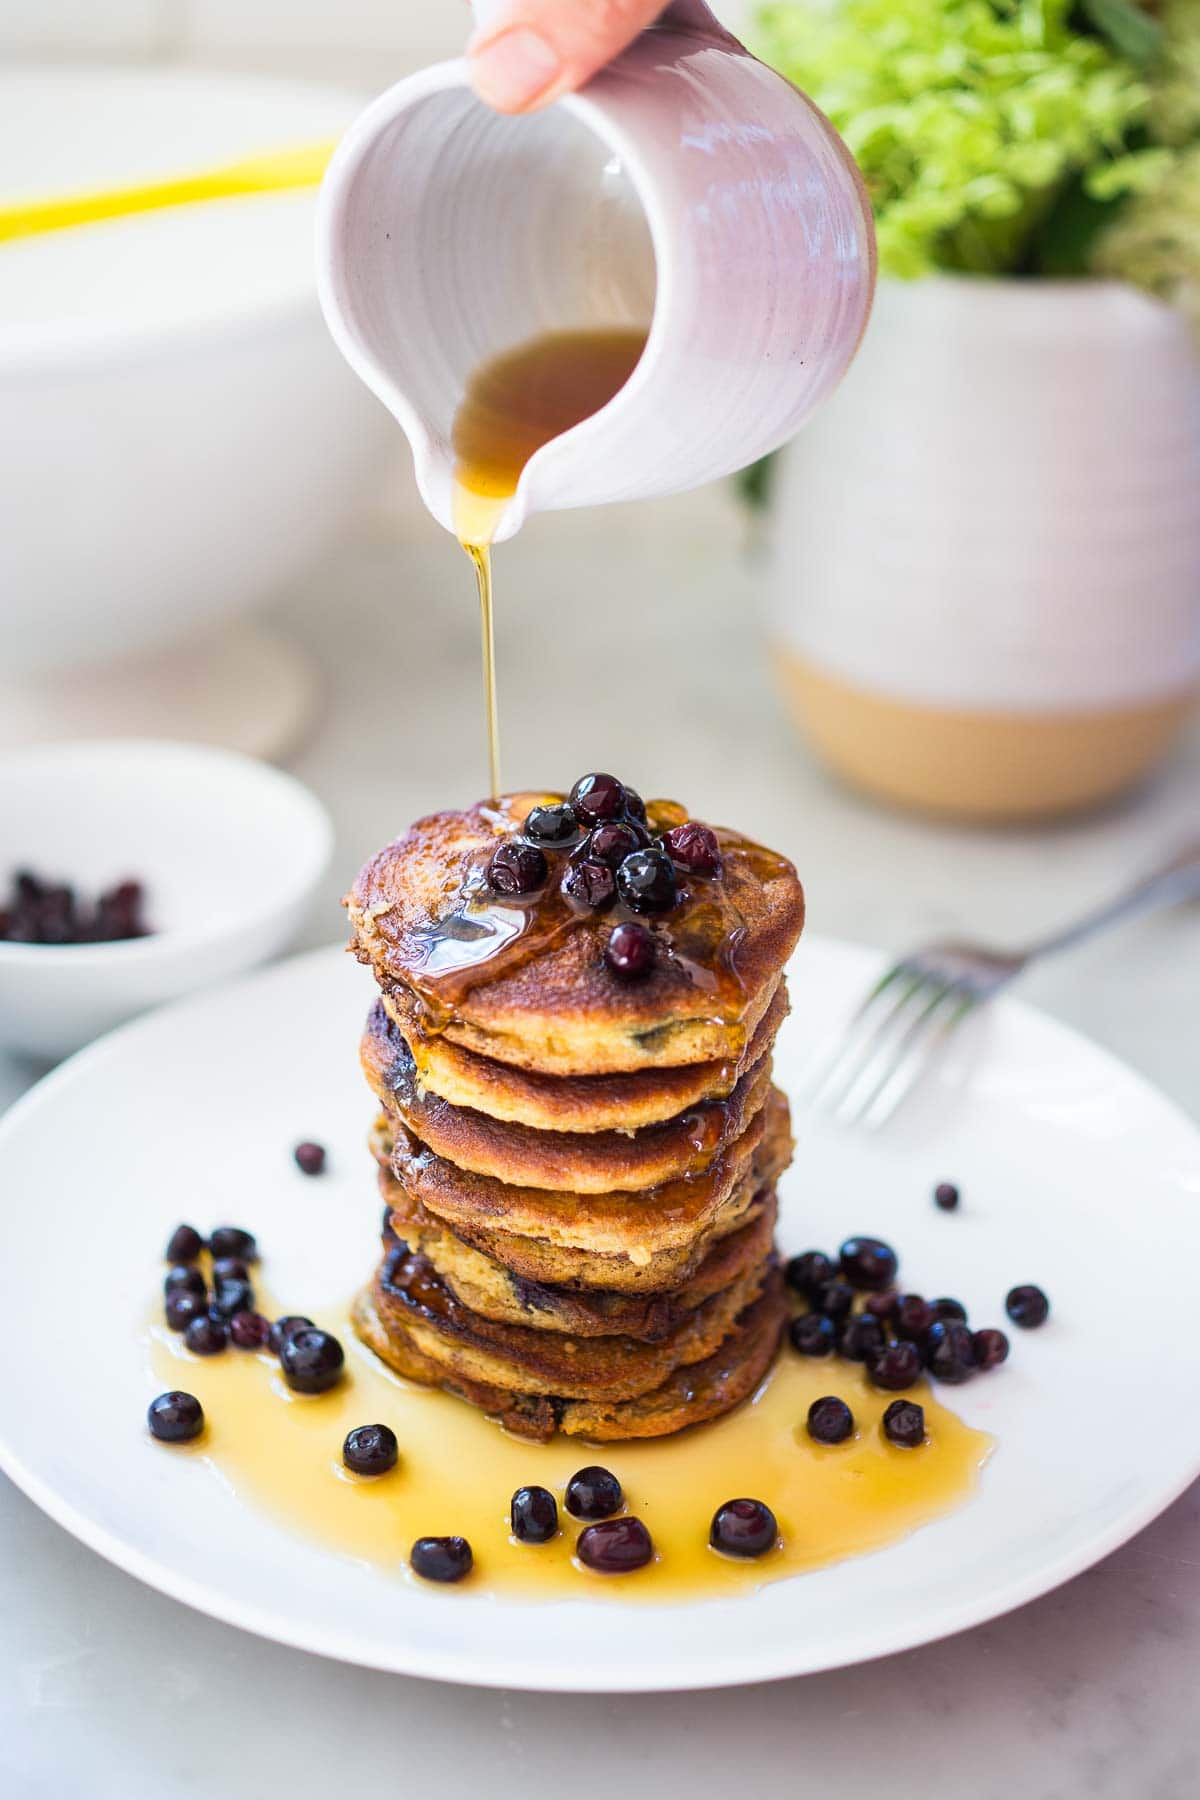 Almond Flour Pancakes with maple syrup and fresh berries- a delicious, one bowl, grain-free, gluten-free, paleo recipe for our favorite breakfast!